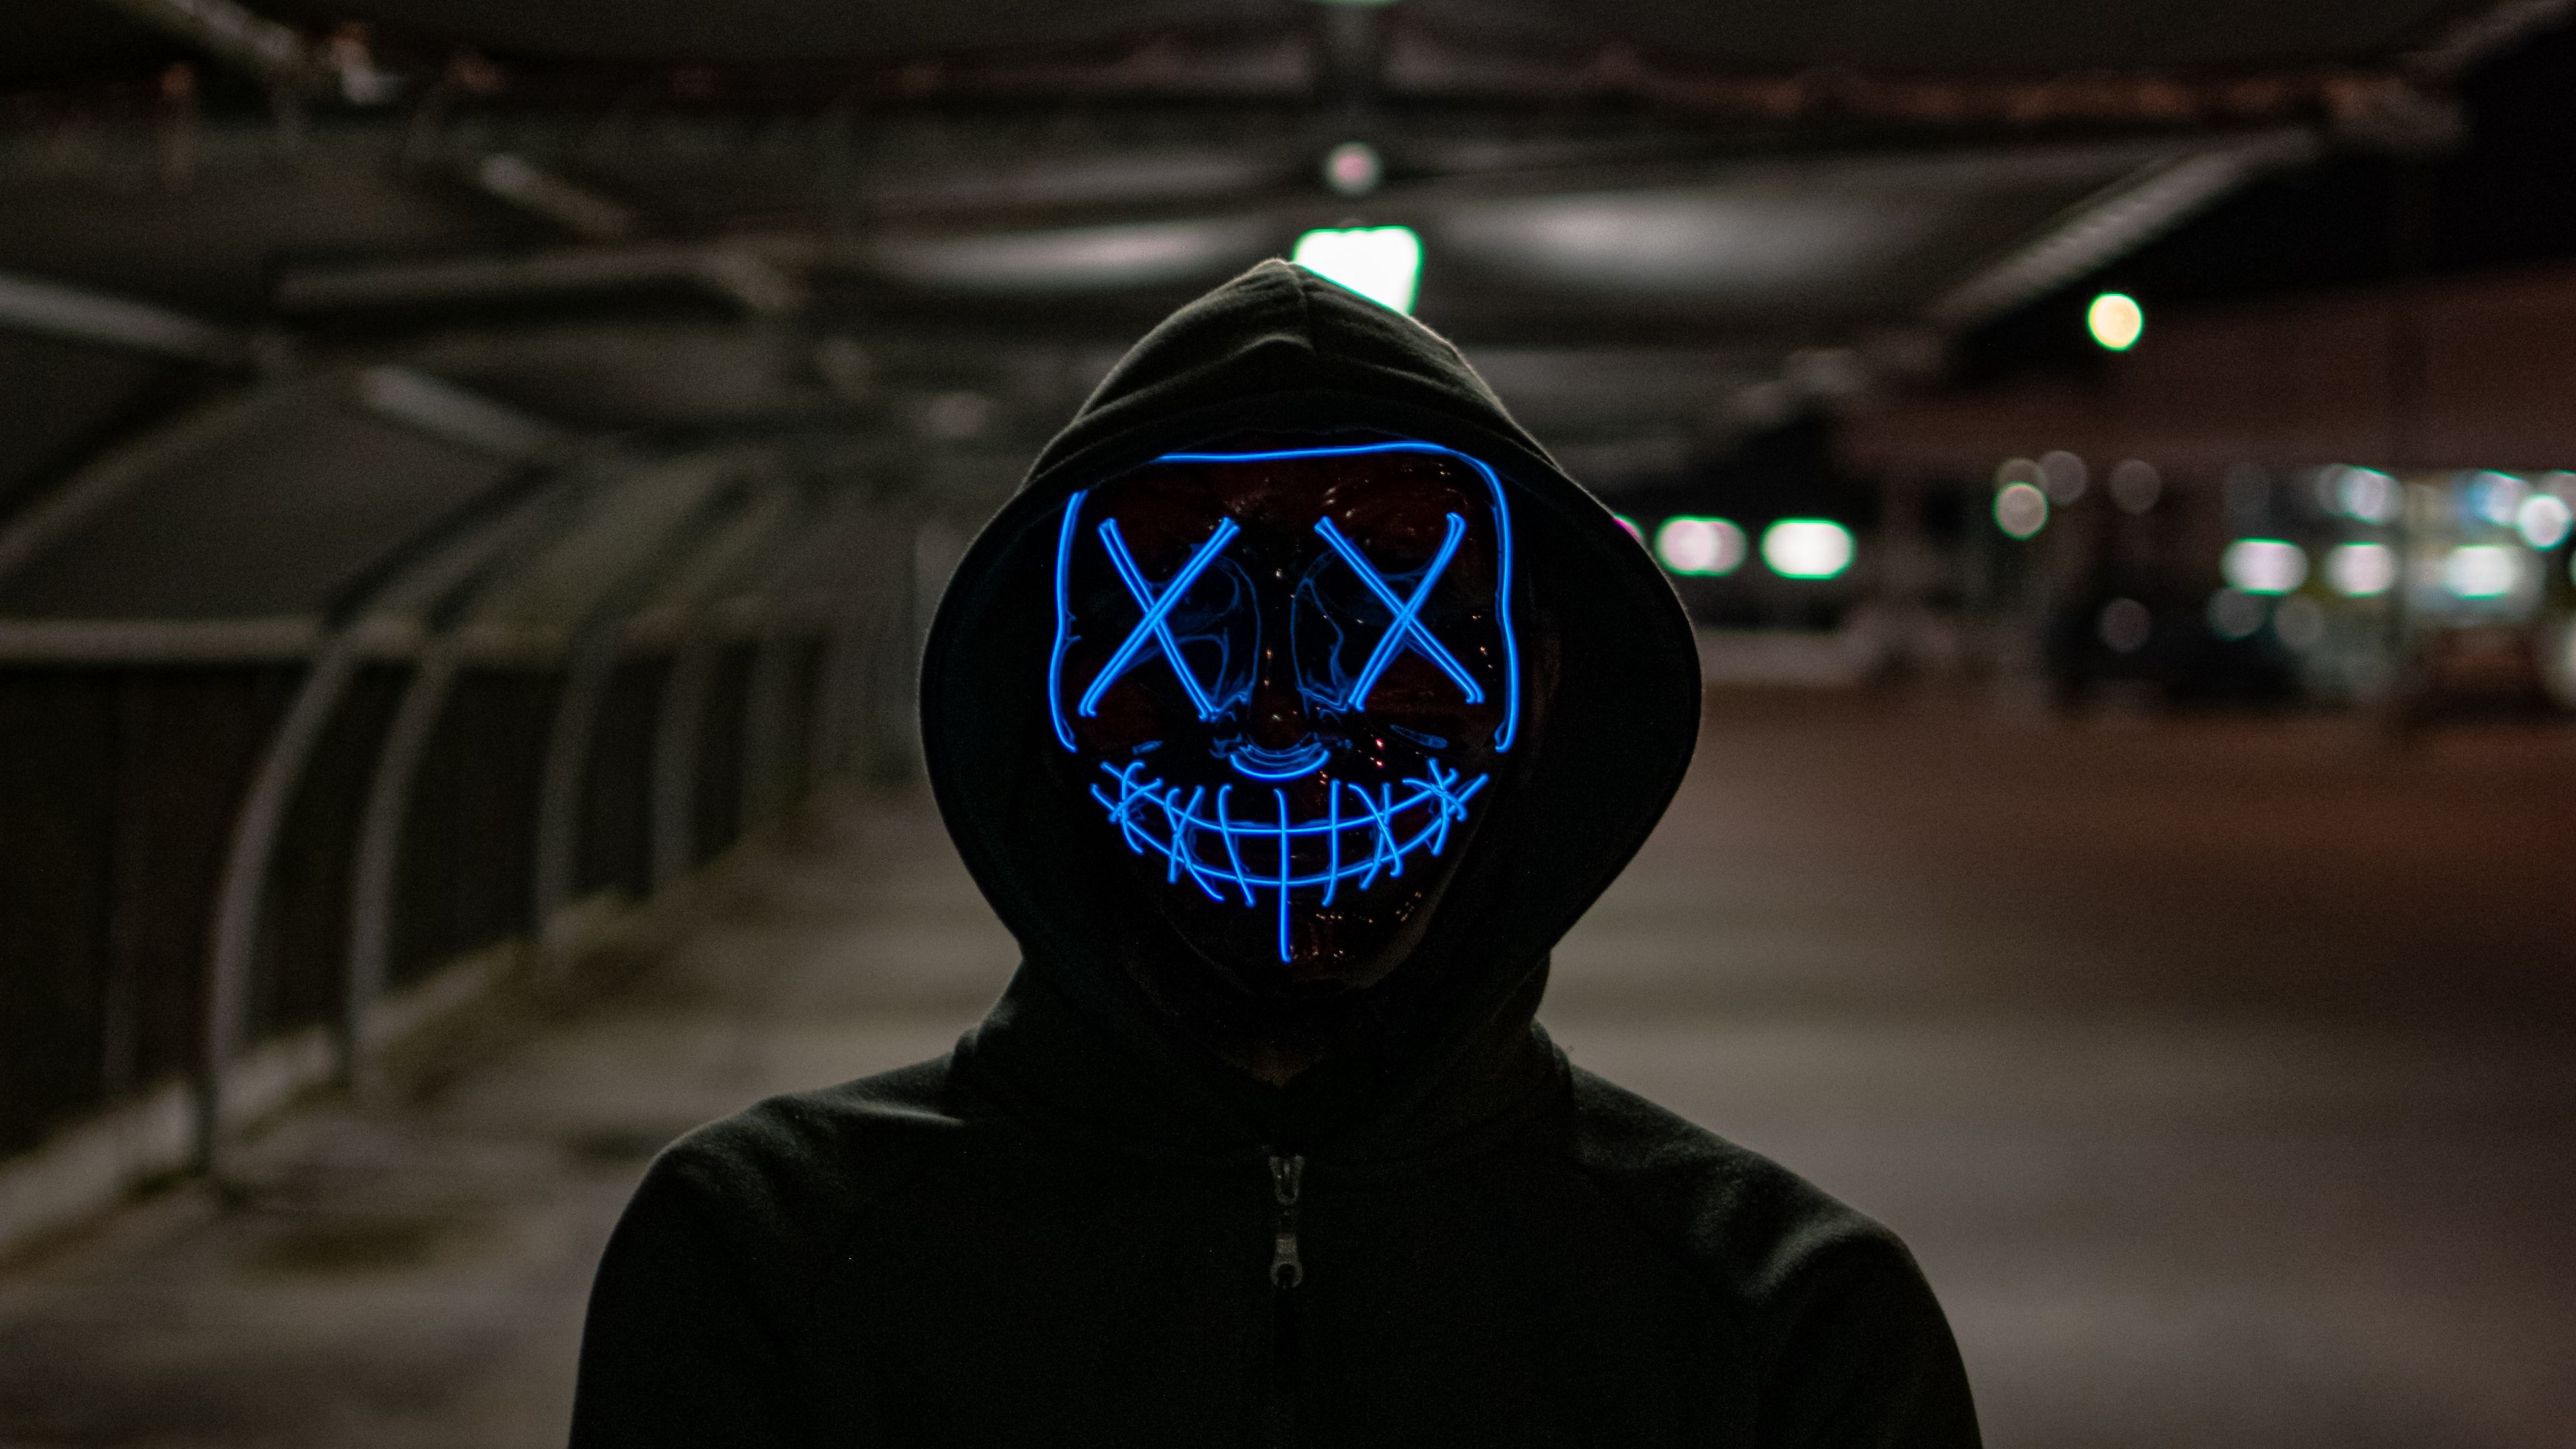 Wallpaper lights dark wallpaper blur neon situations anonymous mask  silhouette hood 4k ultra hd background city background images for  desktop section ситуации  download